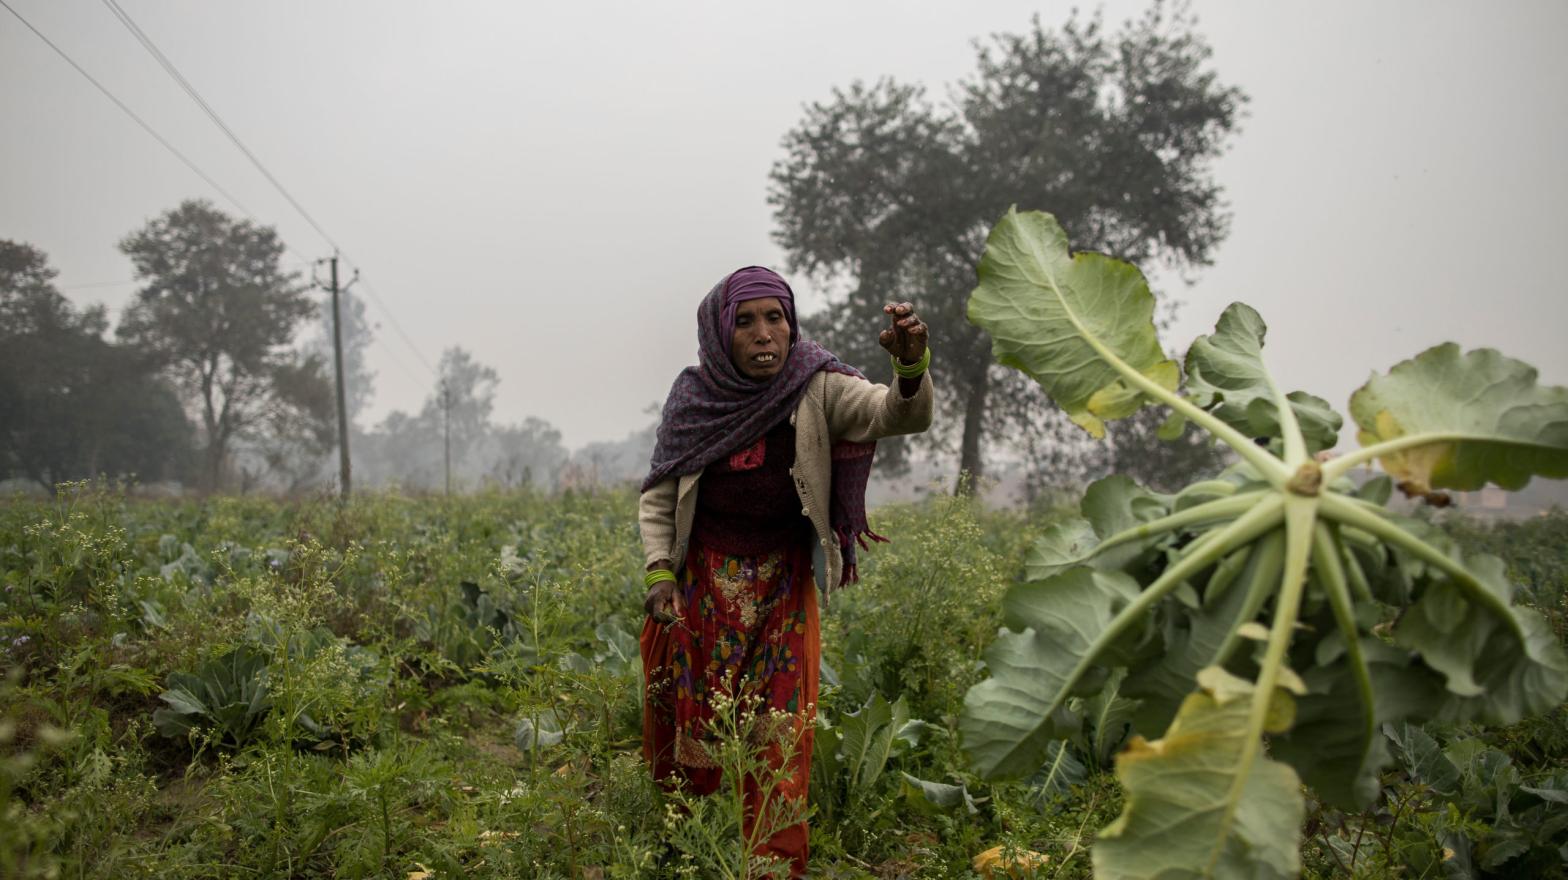 Farmers work in the early morning on a cauliflower farm on Jan. 15, 2021 in Bulandshahr, India. (Photo: Anindito Mukherjee, Getty Images)